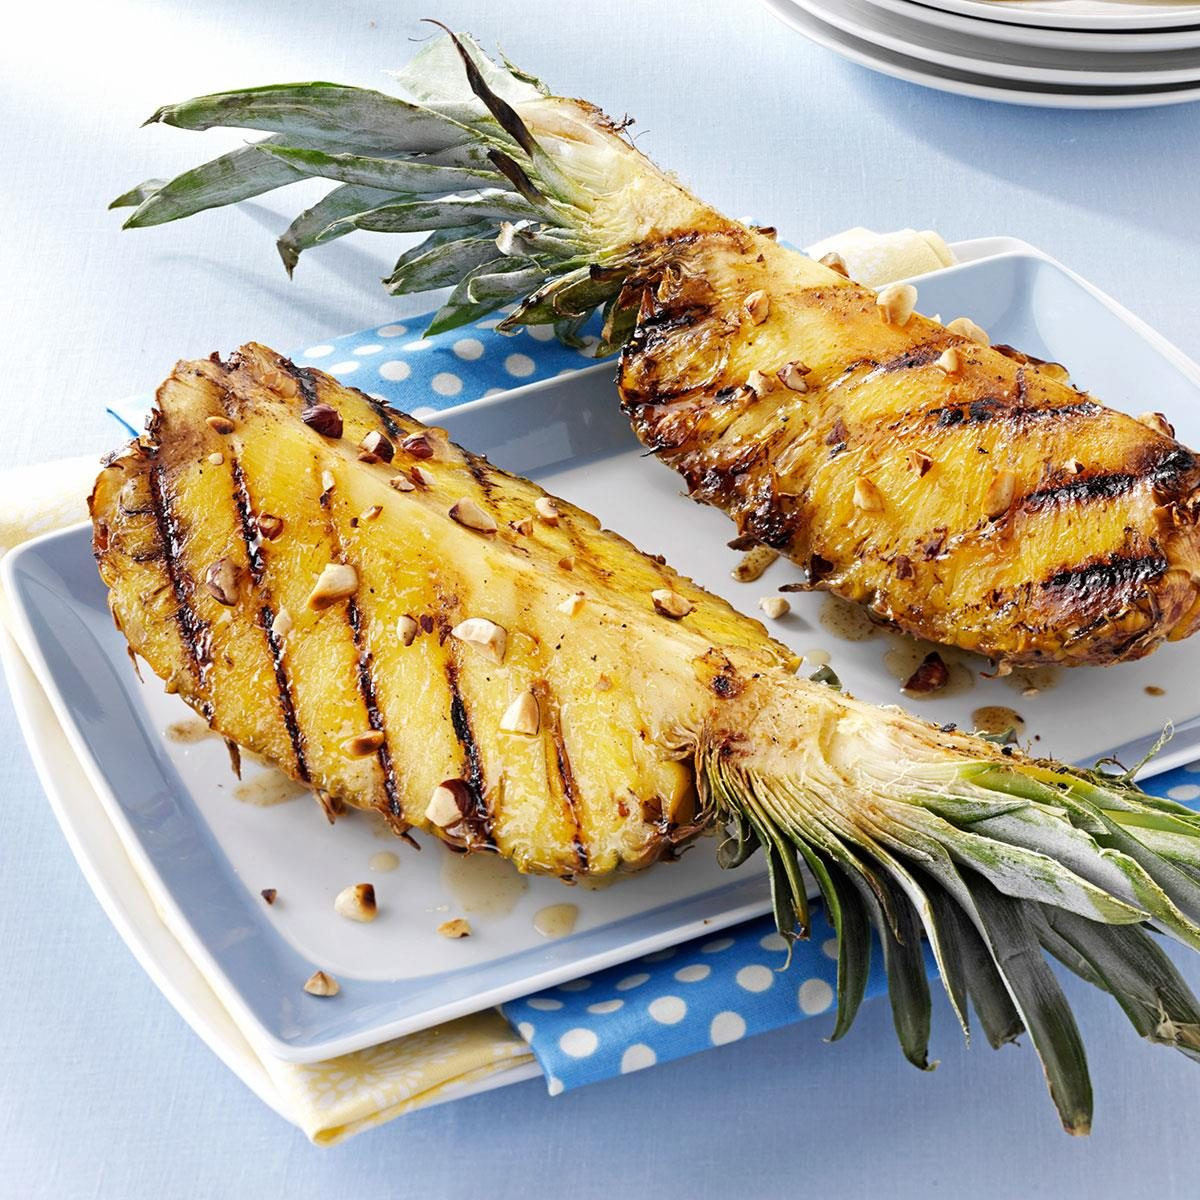 Grilled Pineapple Recipes Lovely Grilled Pineapple Recipe How to Make It